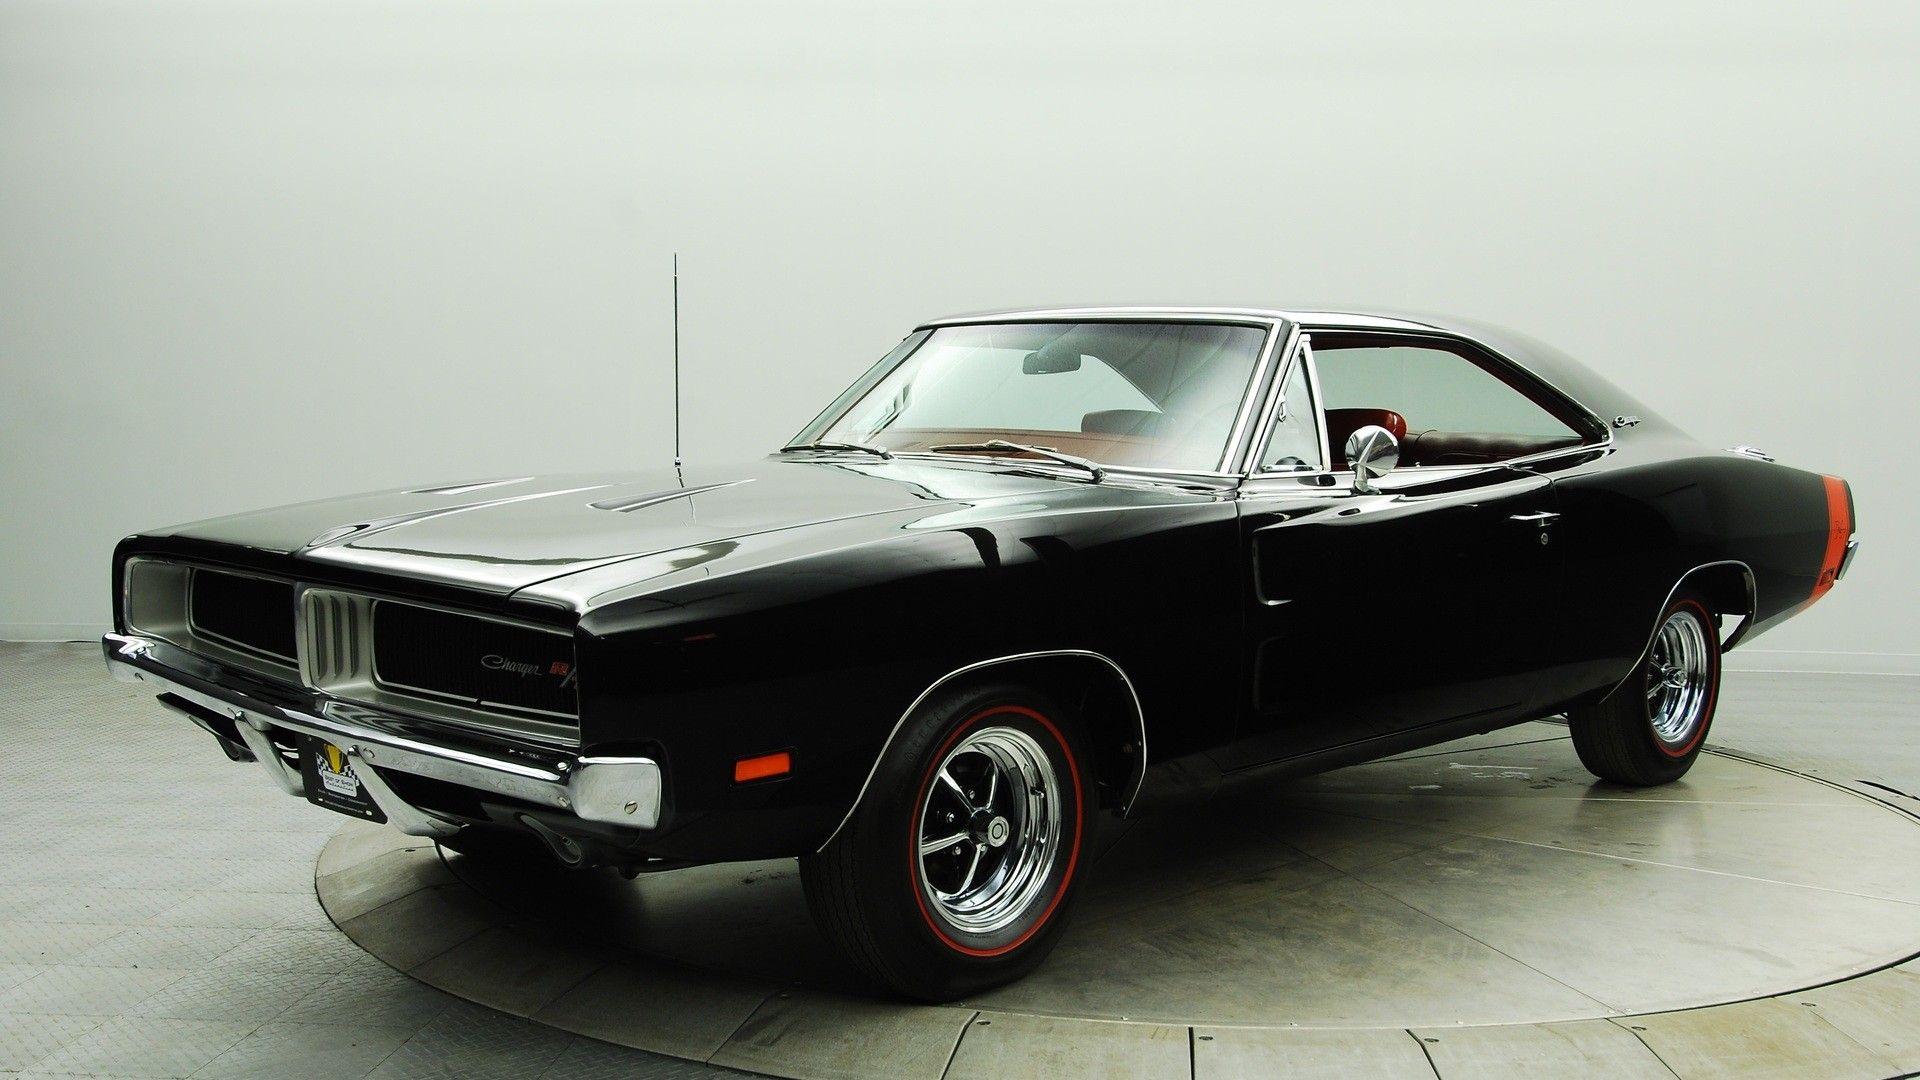 Black Cars Classic Dodge Charger RT Muscle Car